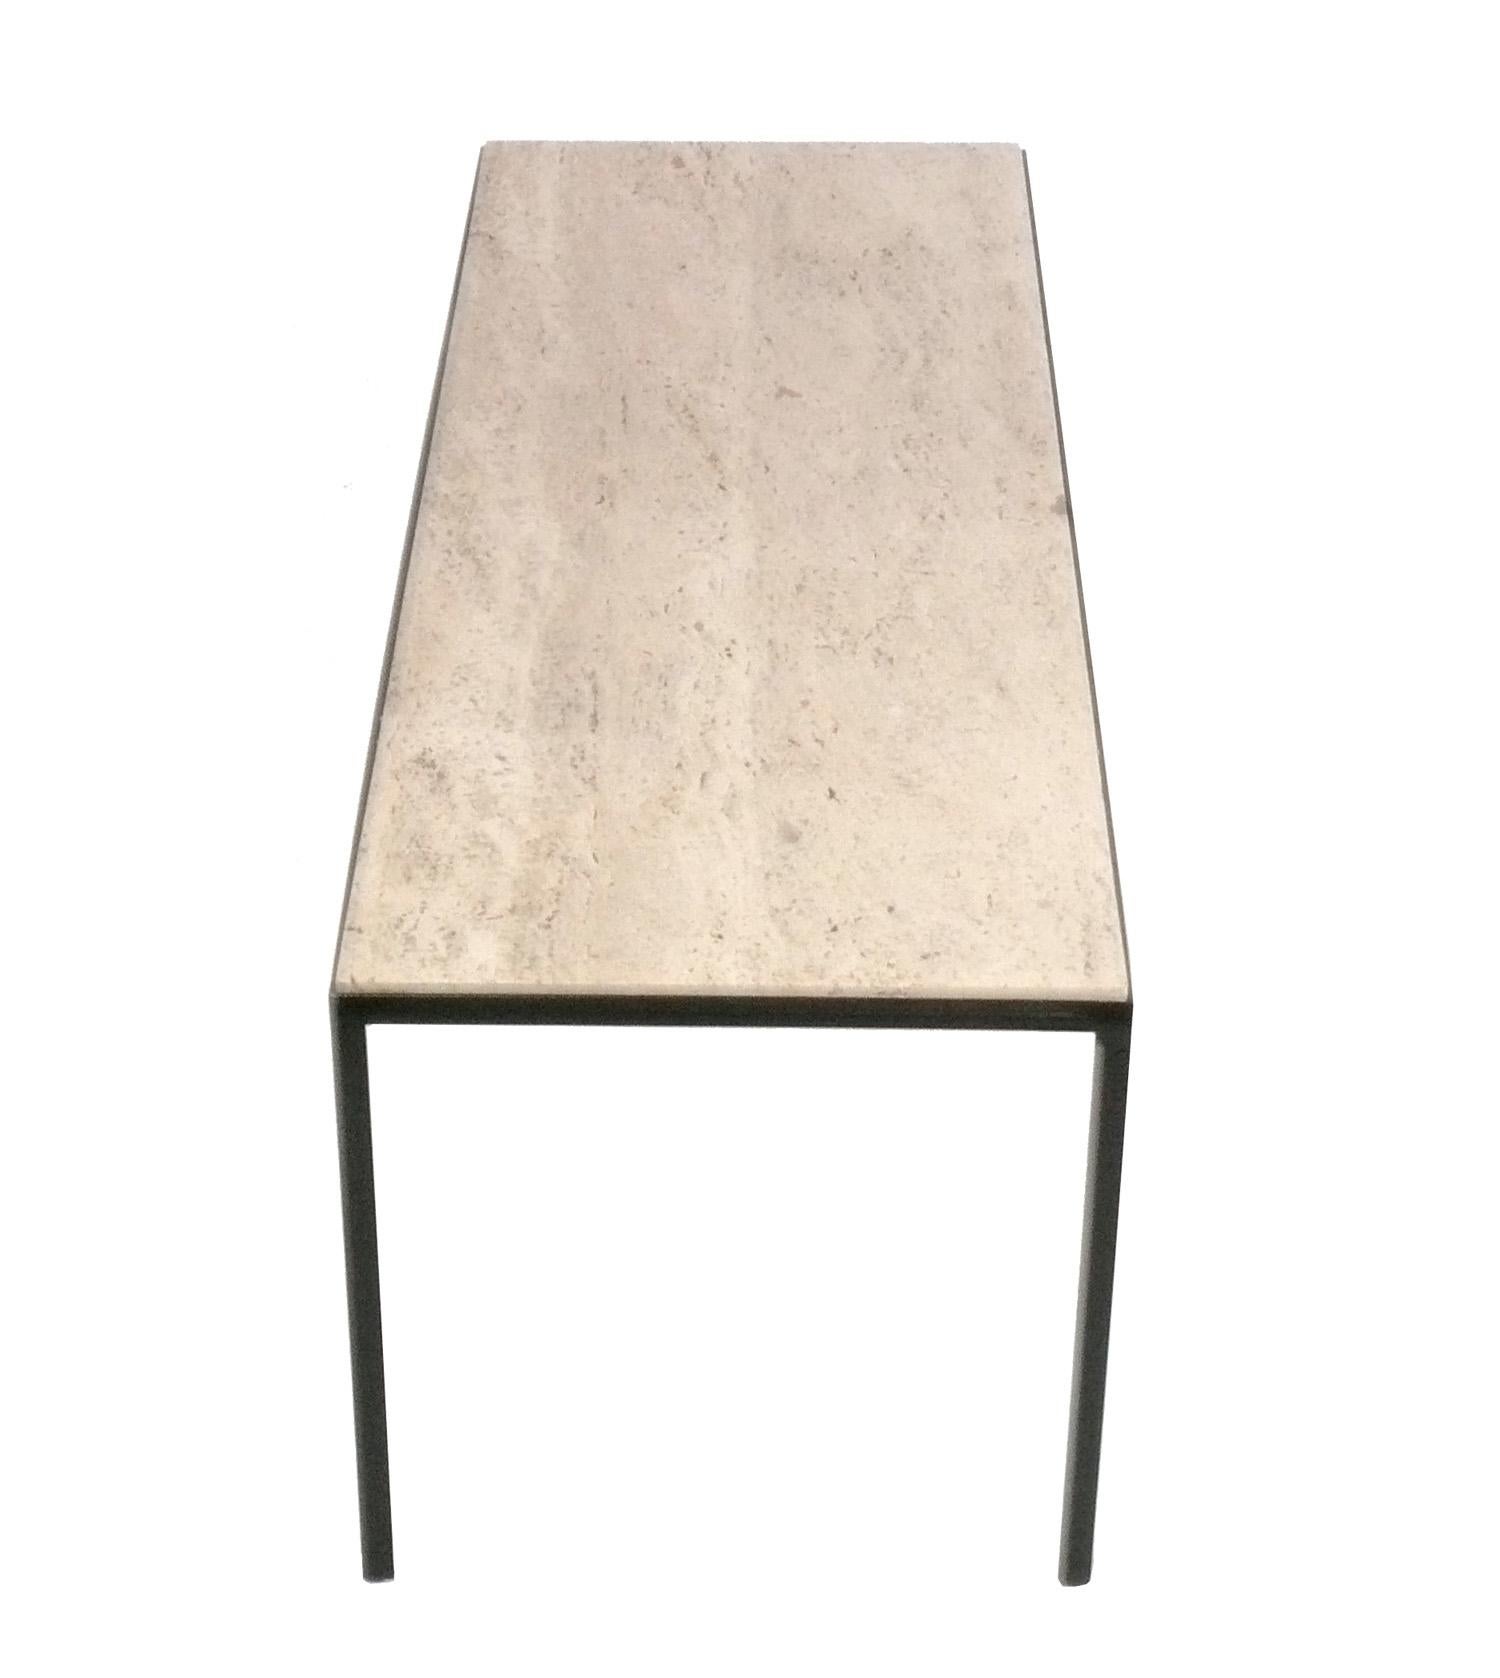 Clean Lined Travertine and Iron Coffee Table, attributed to Florence Knoll for Knoll, unsigned, American, circa 1960s. 